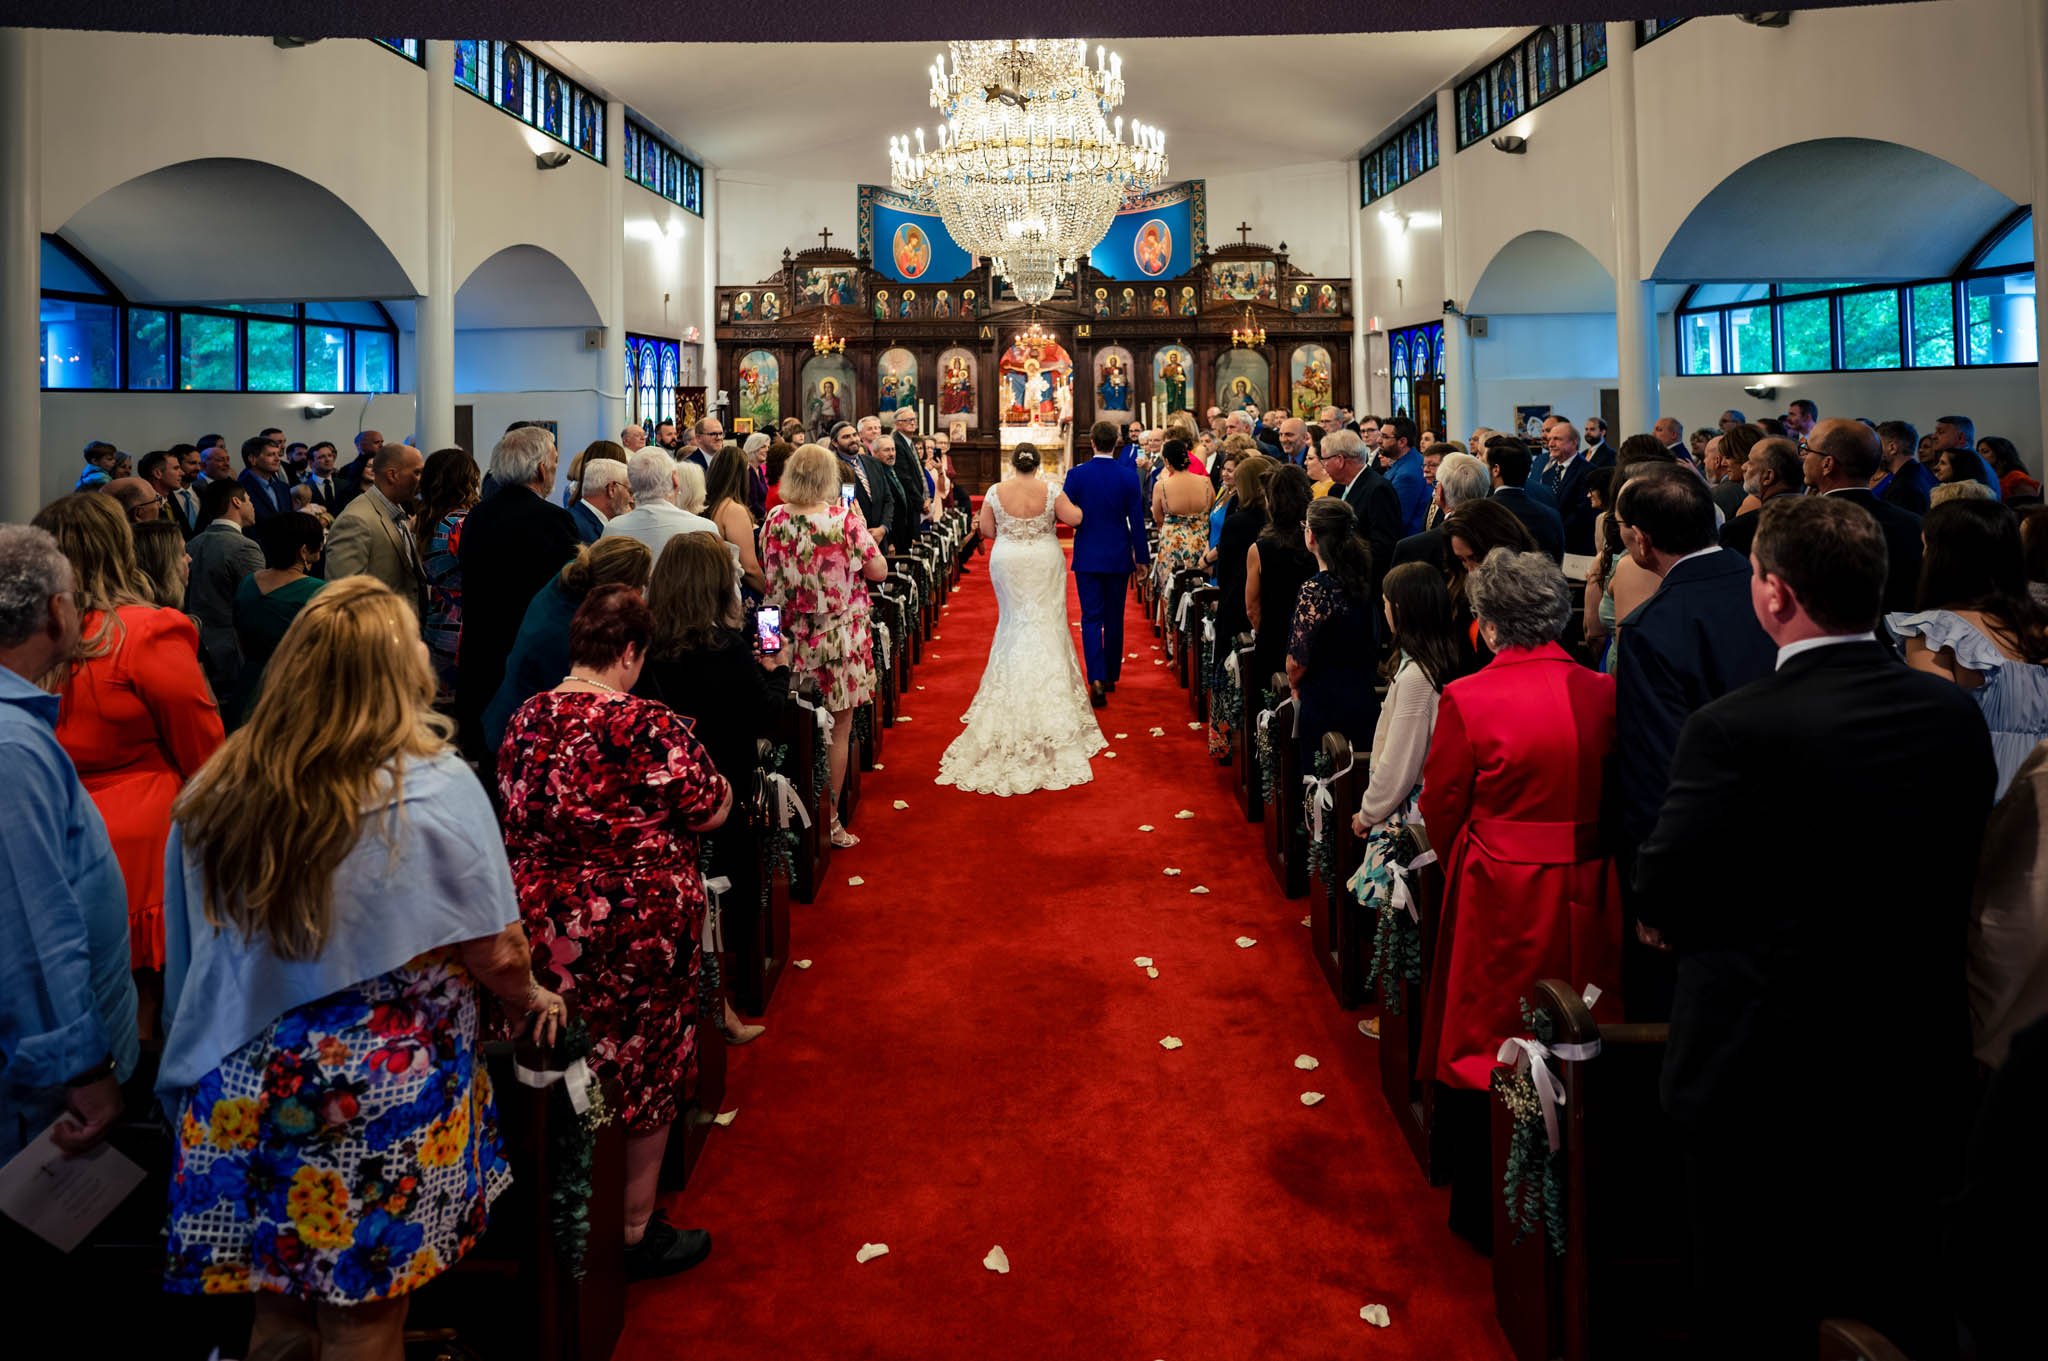 Raleigh NC wedding photographer captures a bride and groom walking down the aisle in a church.